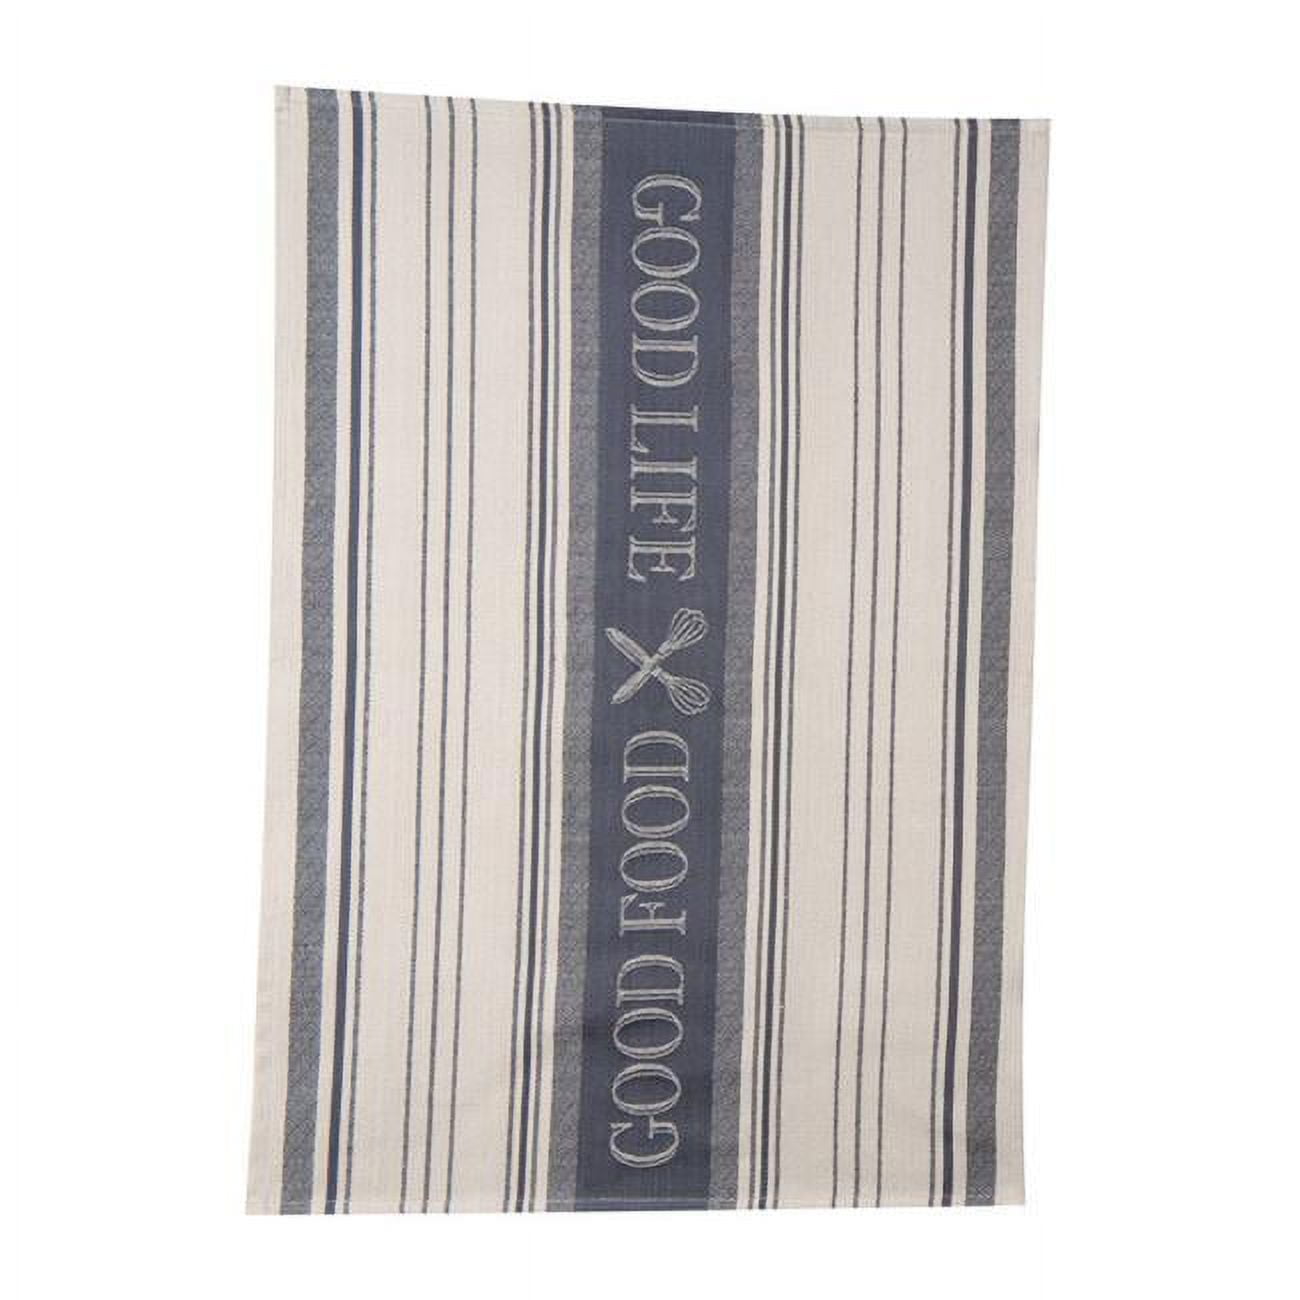 18 X 28 In. Graphite Cotton Tea Towel - Pack Of 6